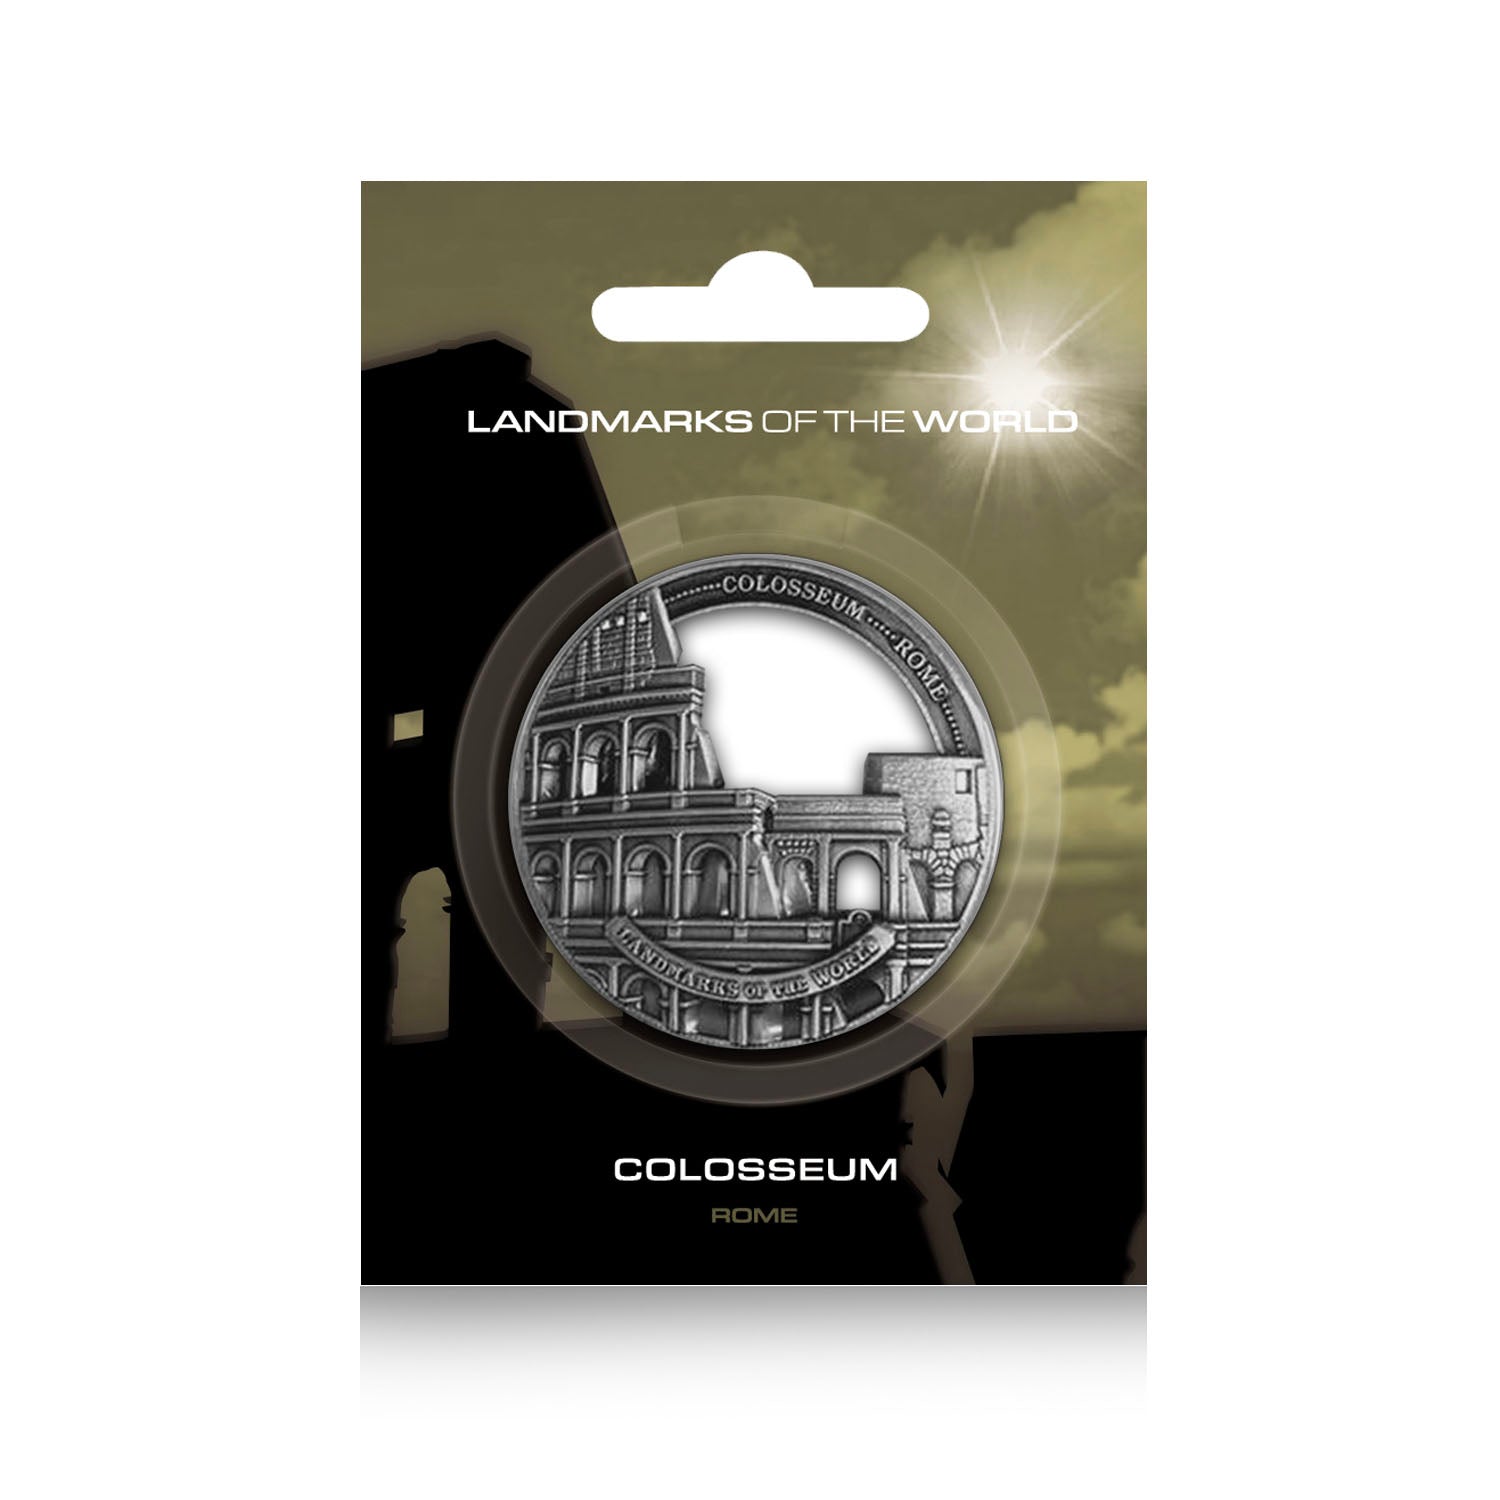 Landmarks of the World - The Colosseum Coin